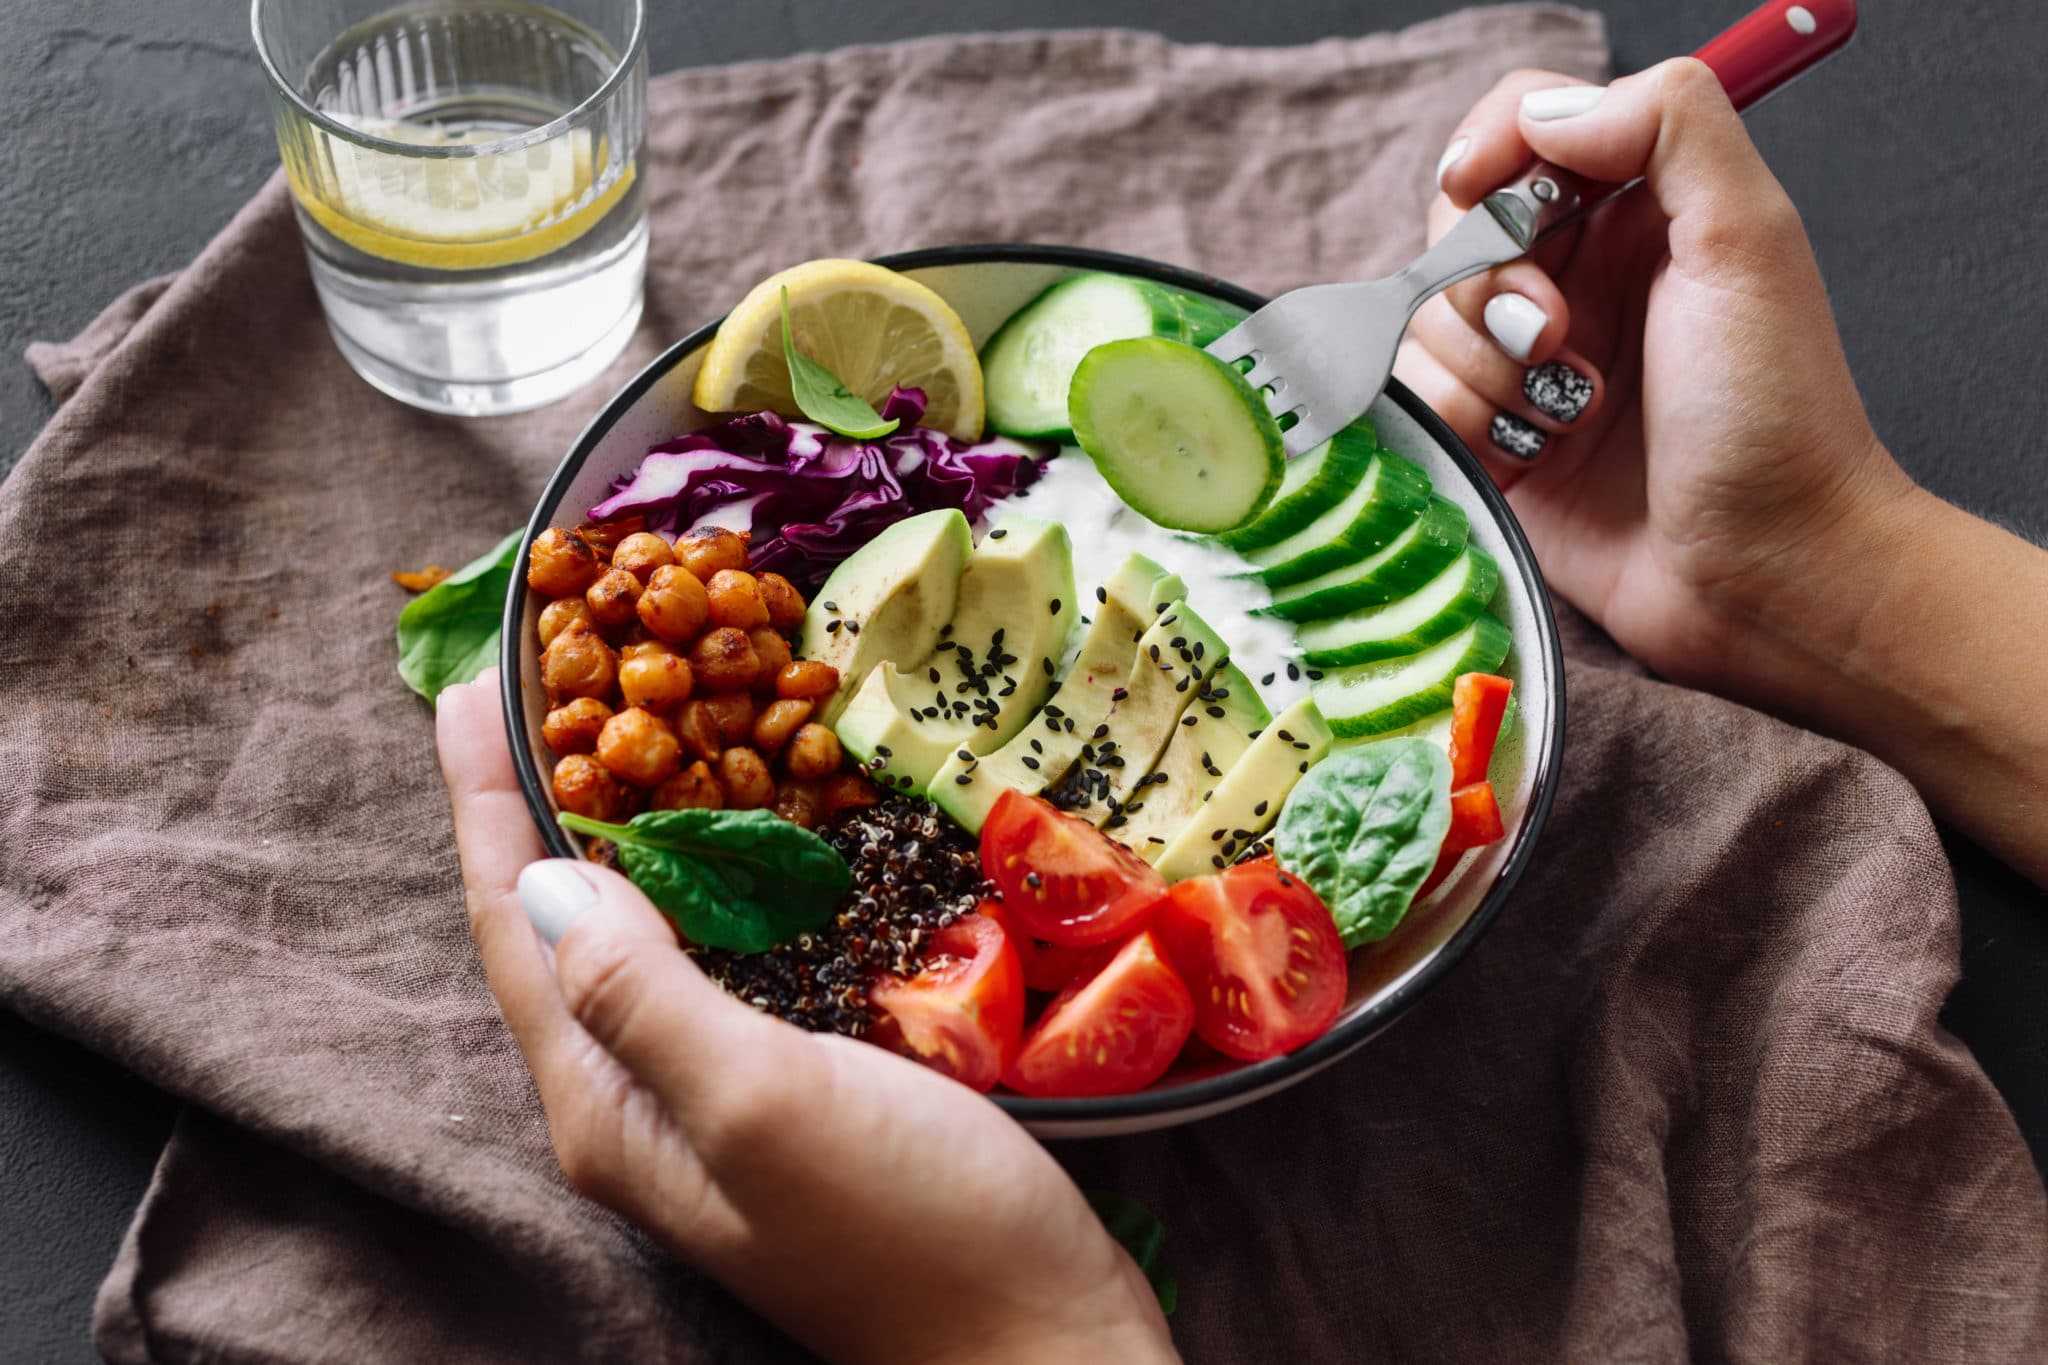 Healthy salad with avocado, chickpeas, tomatoes, cucumbers, and purple cabbage